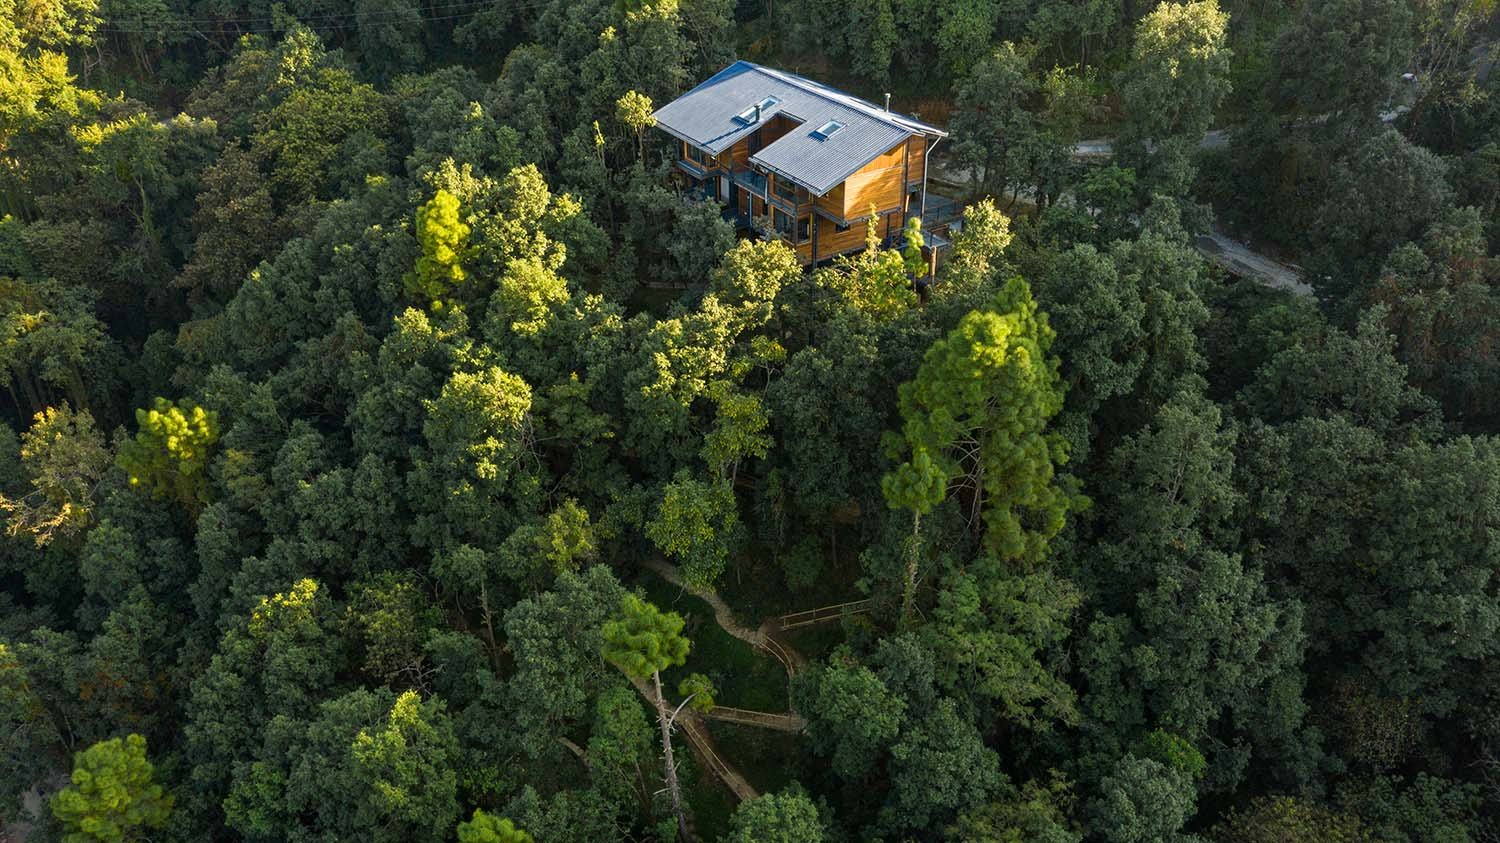  | The Villa in the Woods, © Andre J. Fanthome, courtesy of Studio Lotus